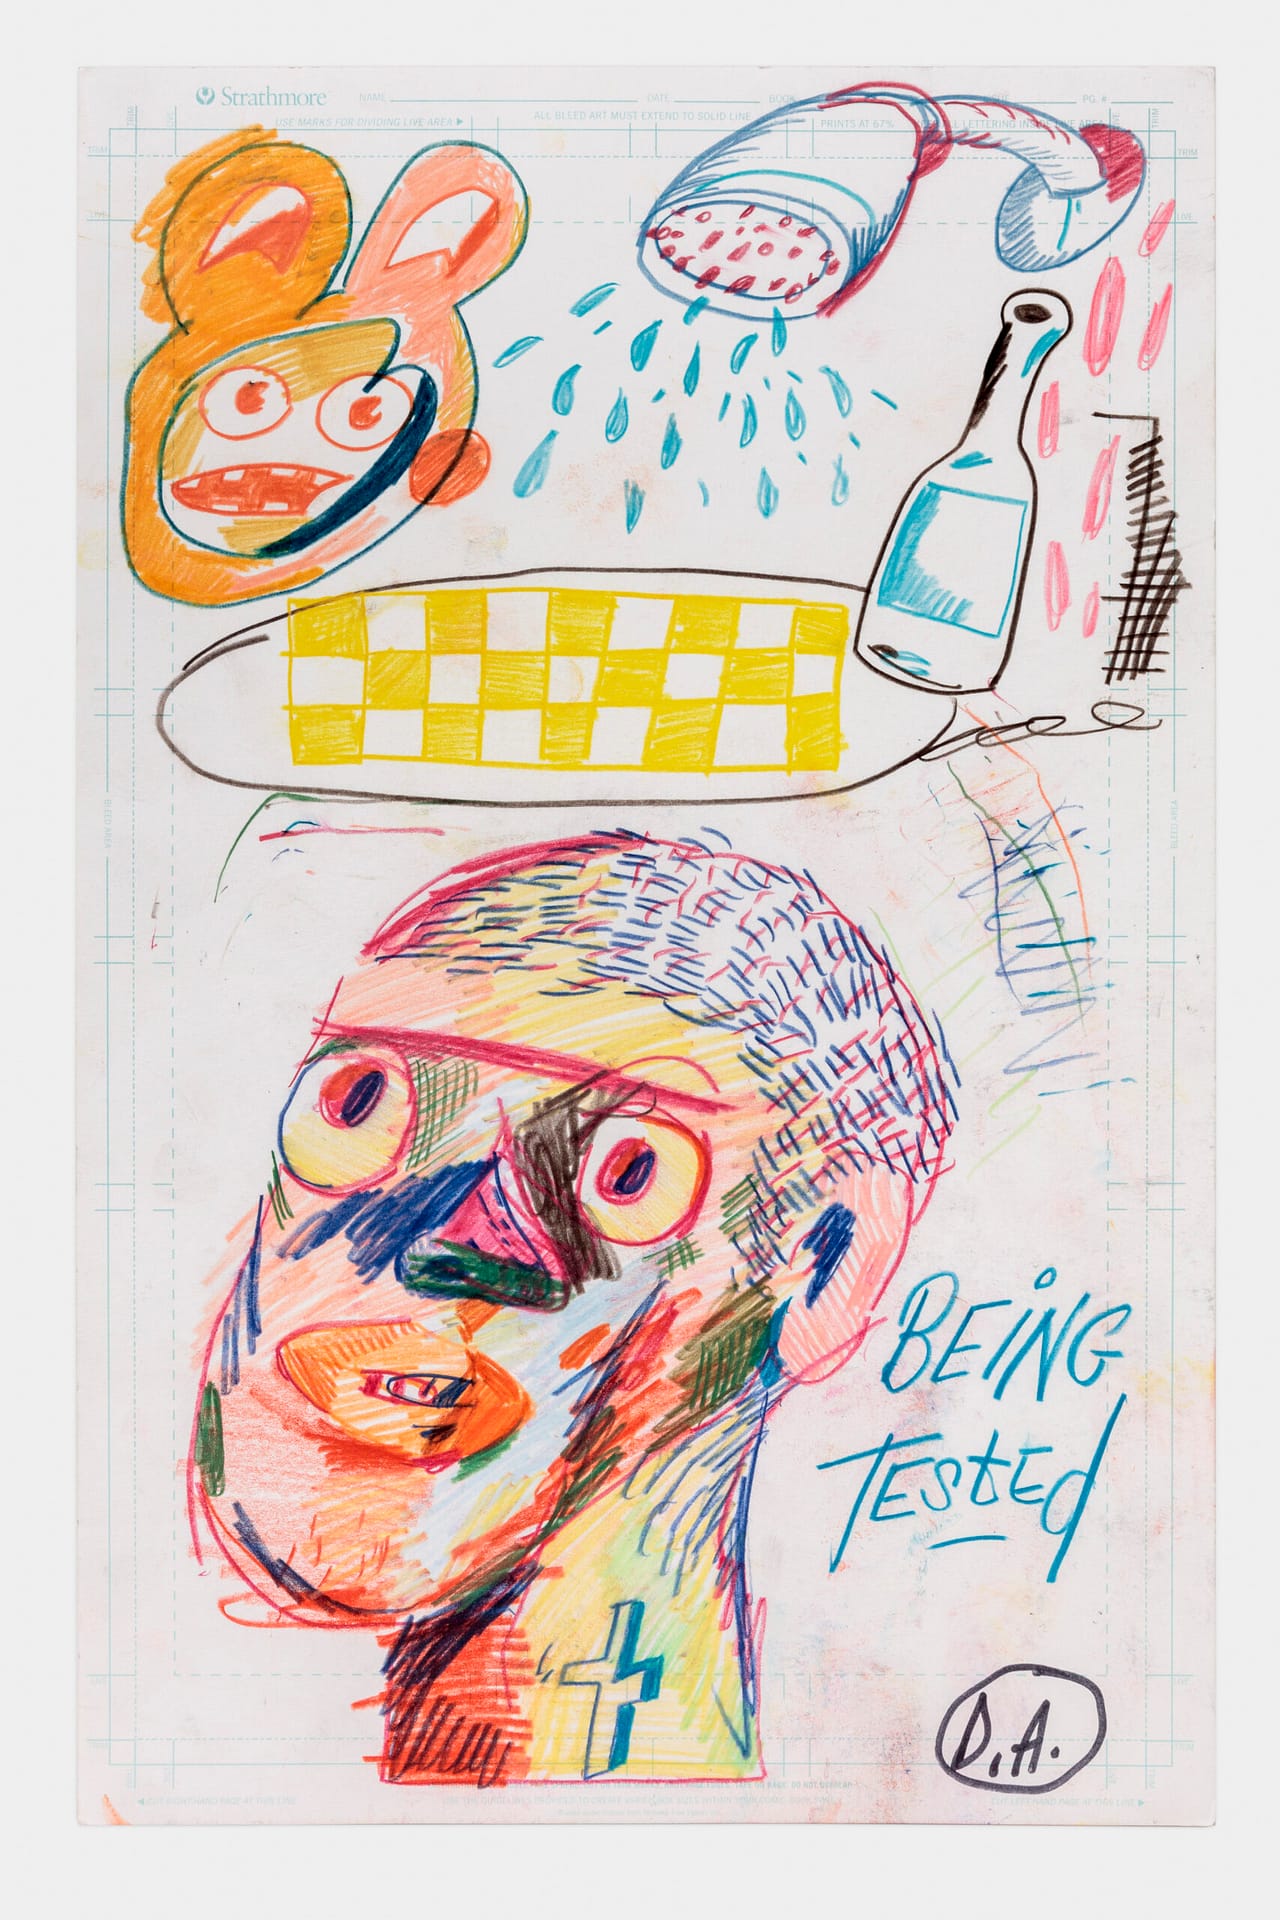 Darius Airo: Casual Banter, an exhibition of drawings on paper curated by Joshua White